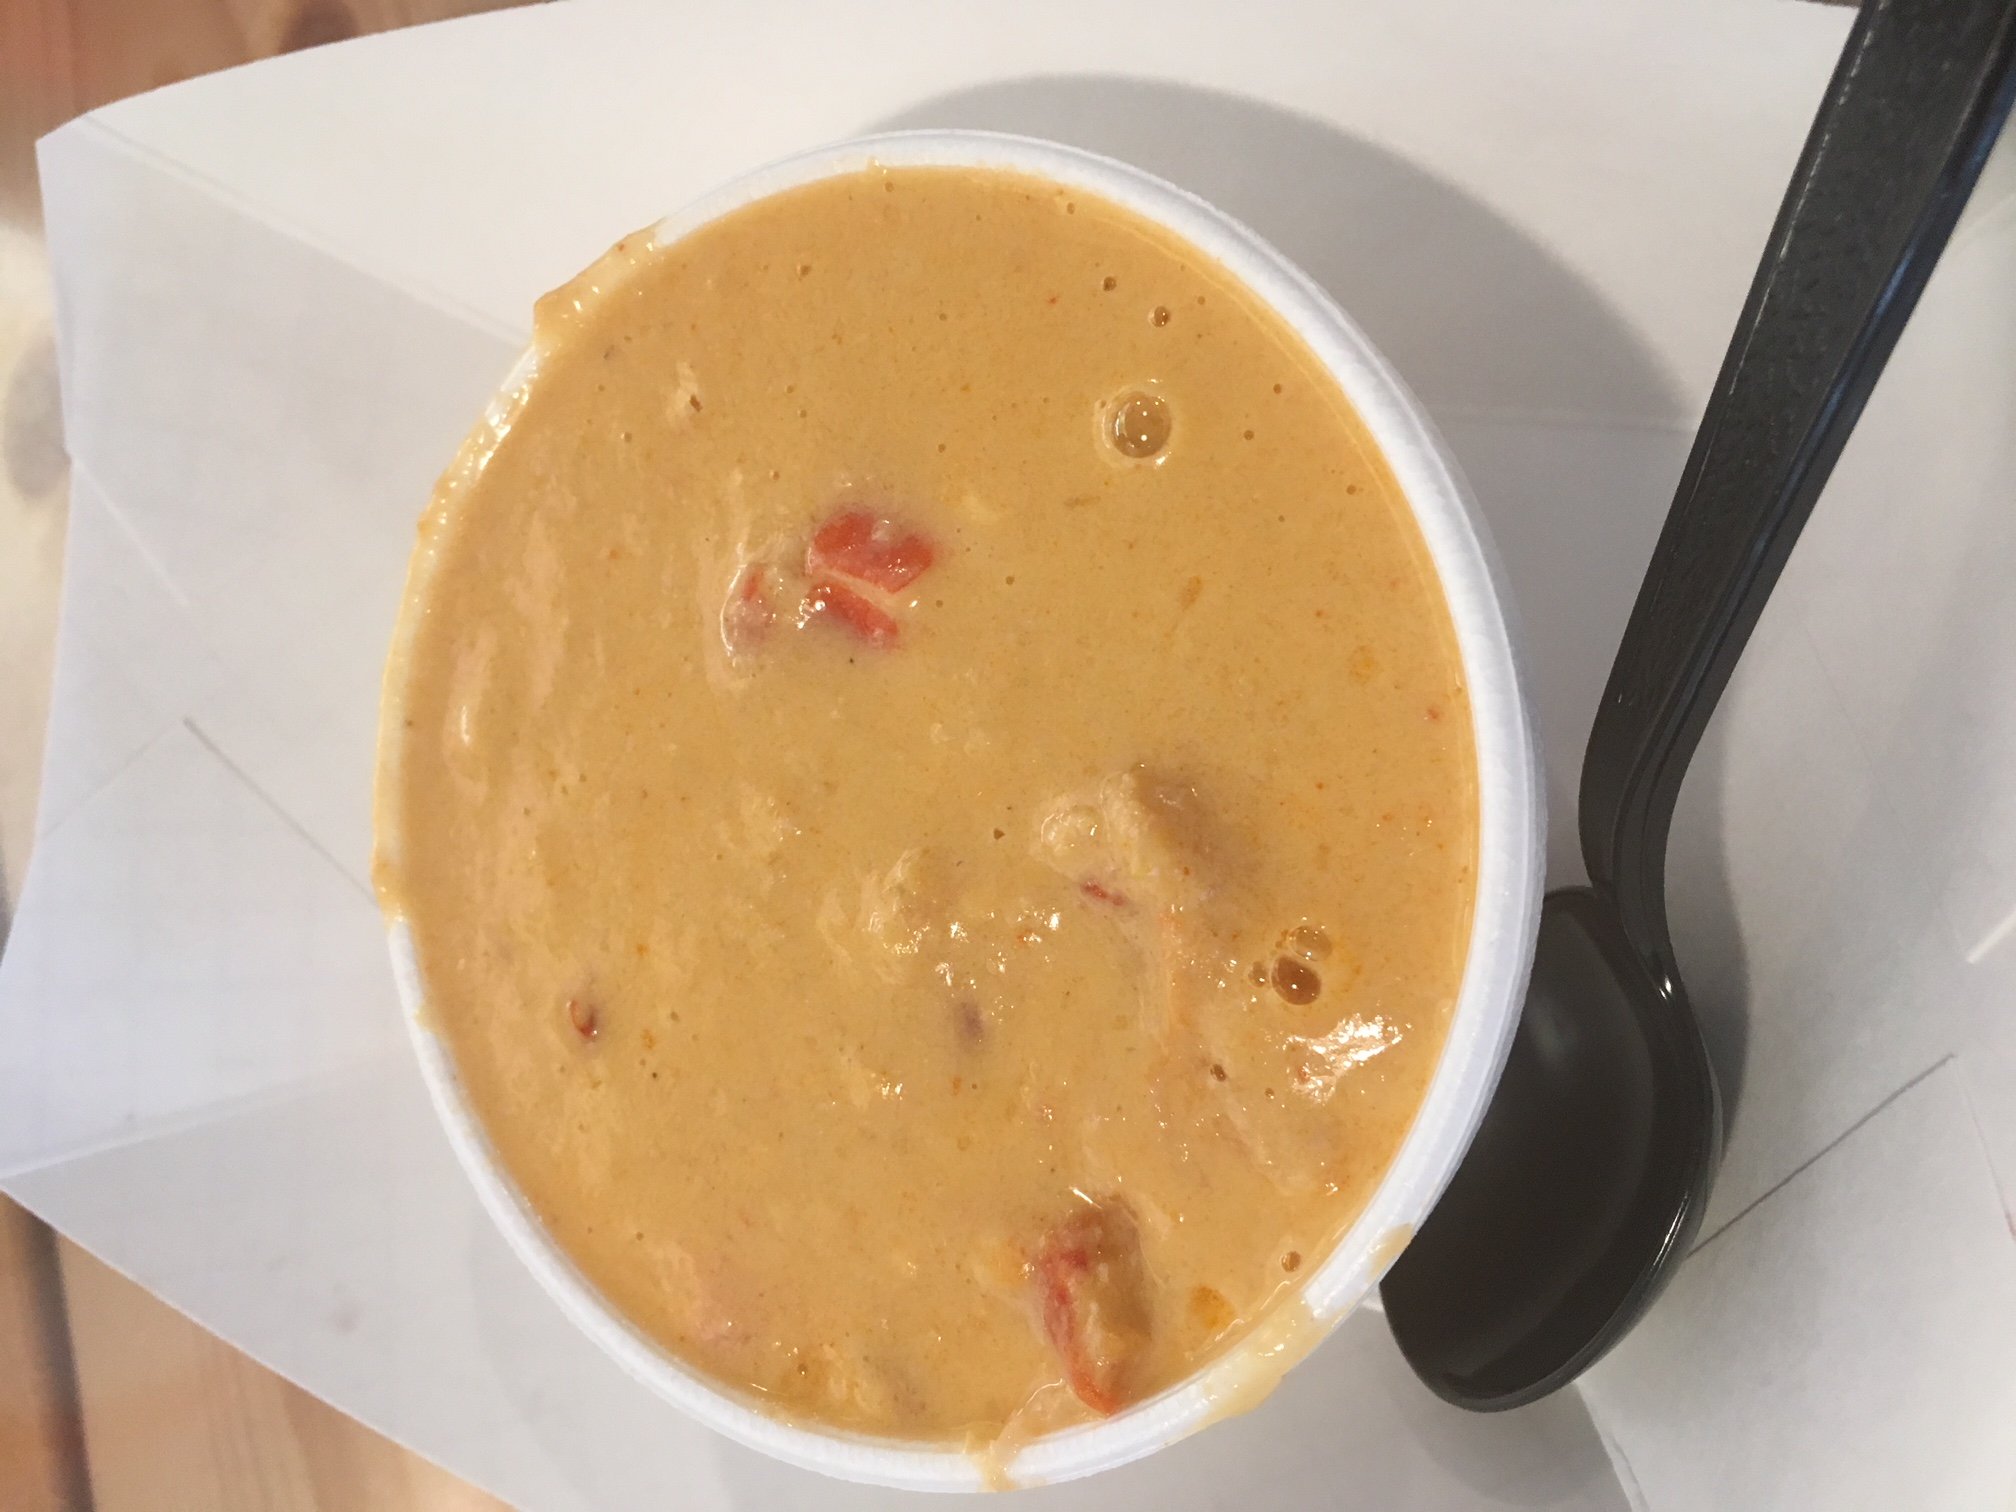 Lobster bisque from The Beach Plum in New Hampshire.